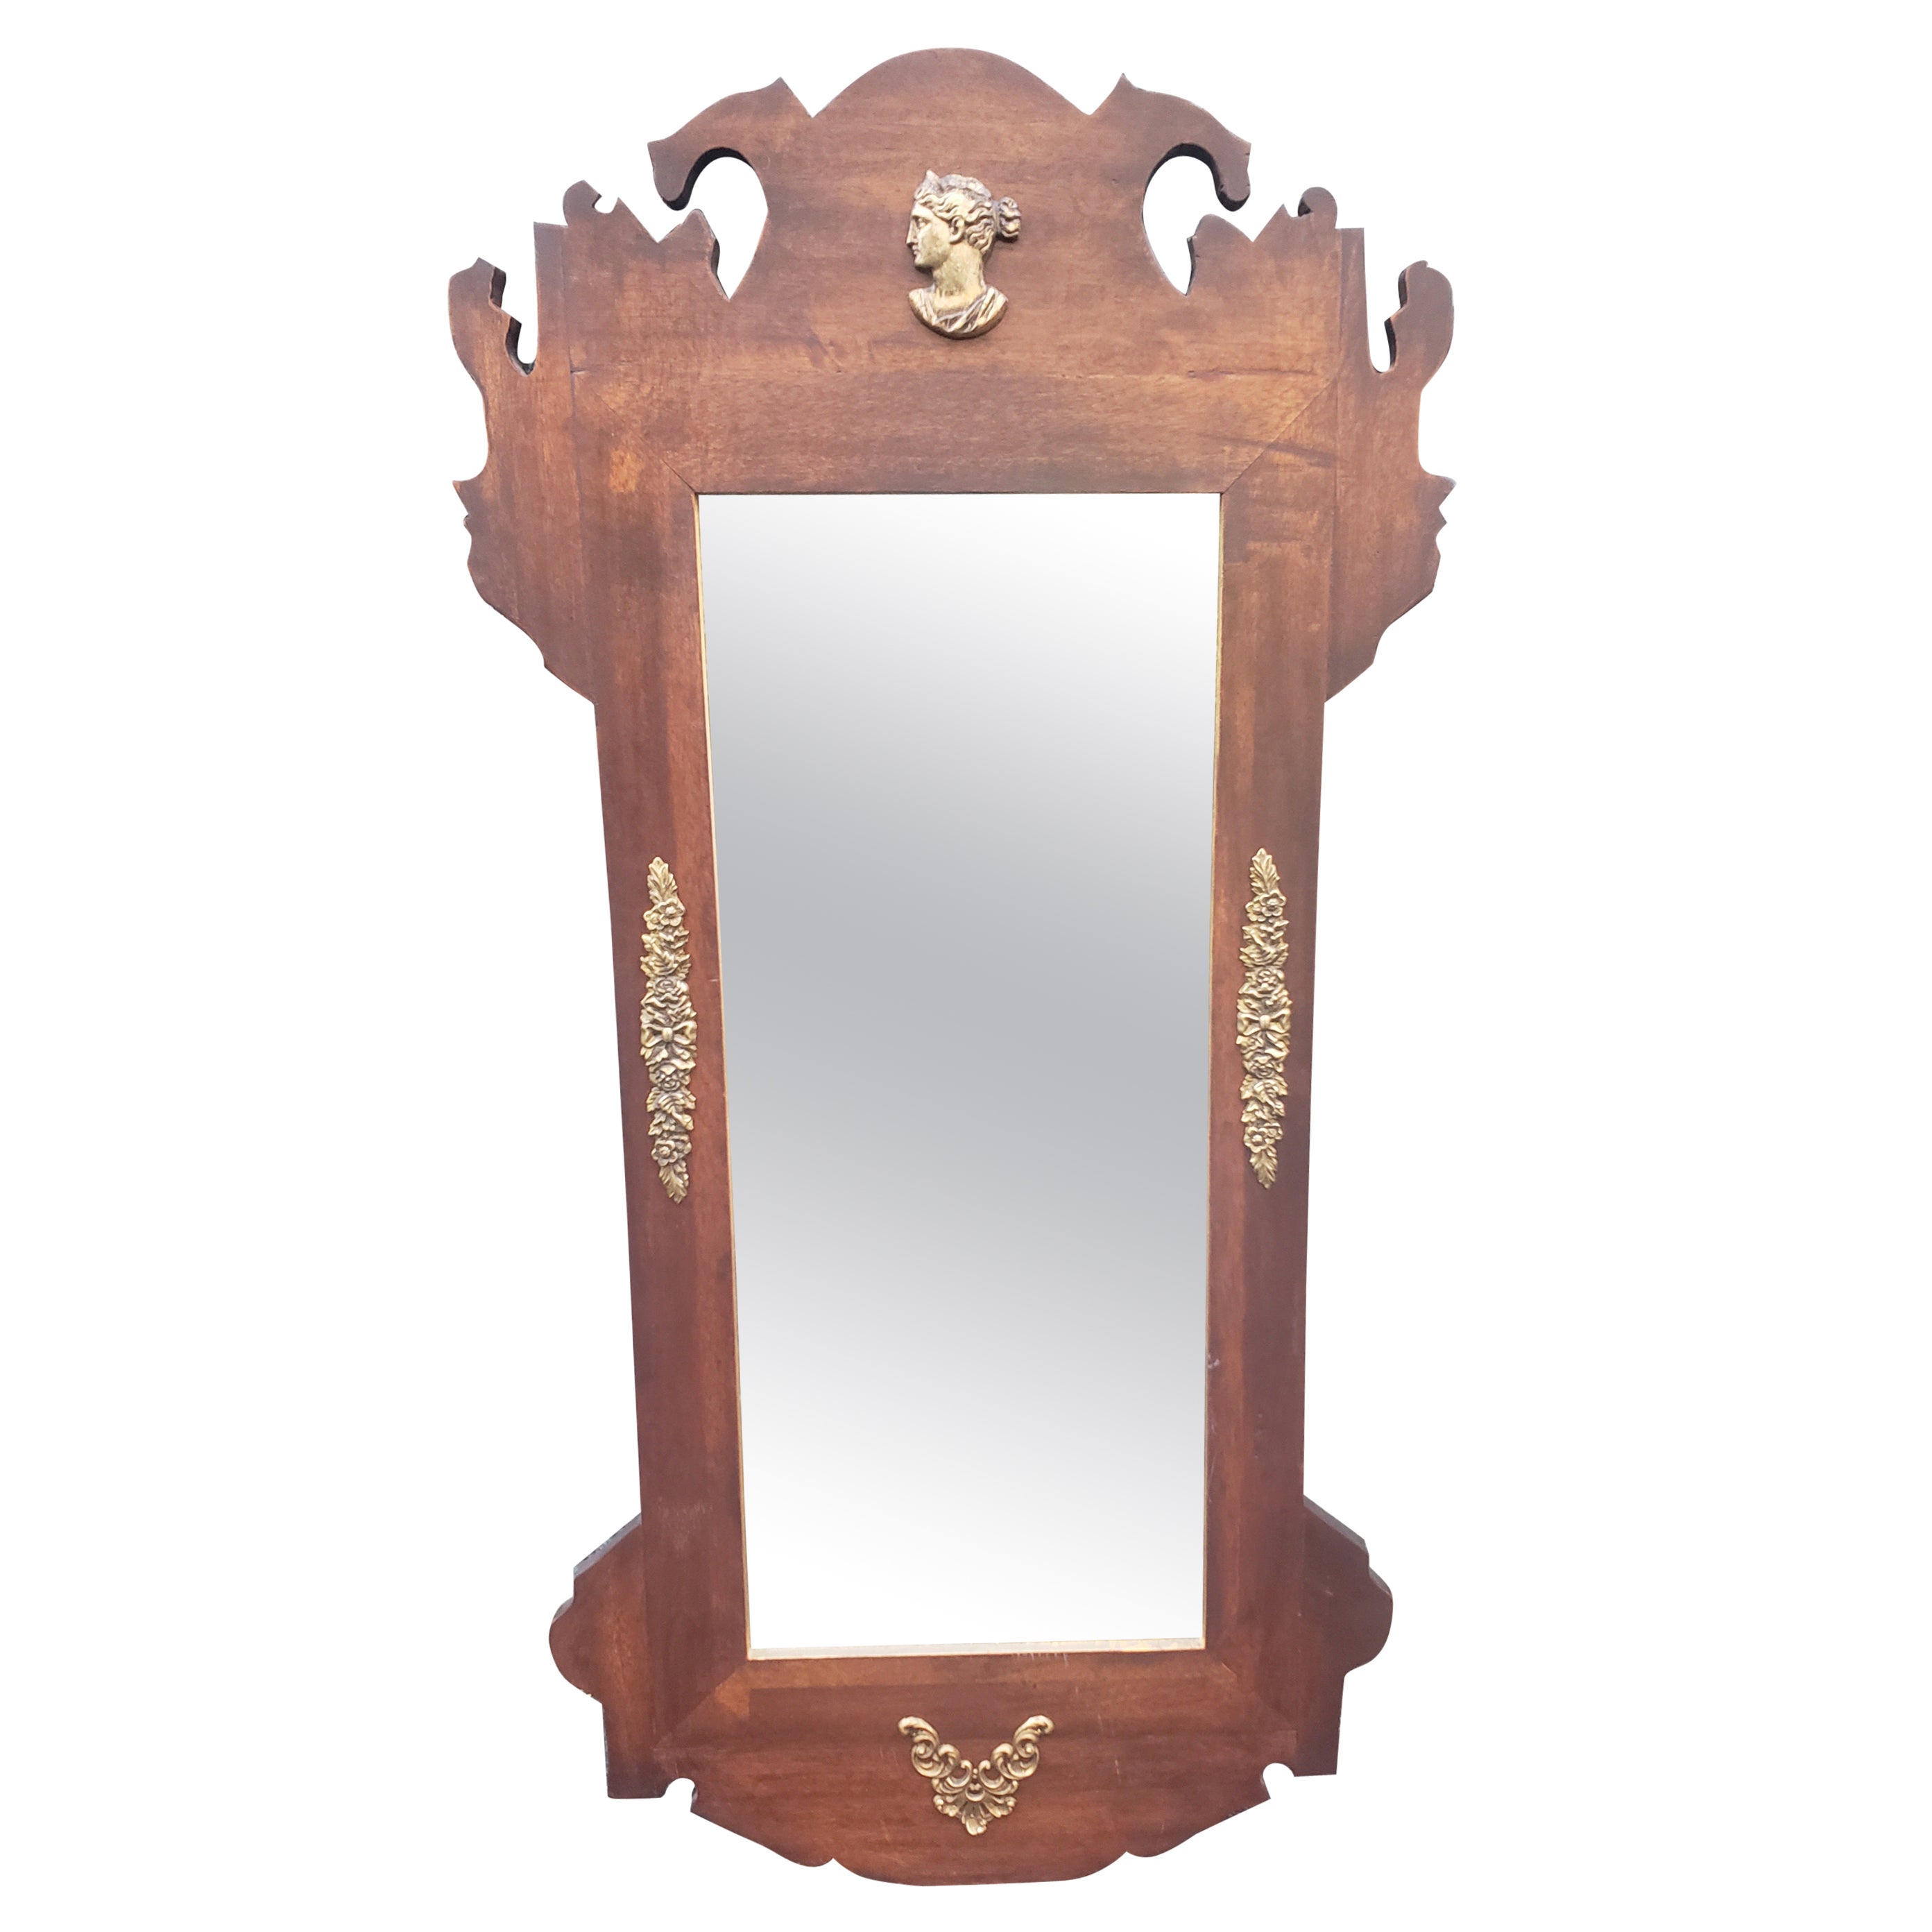 Early 20th C Neoclassical Bronze Mounted Partial Gilt Mahogany Scroll-Ear Mirror For Sale